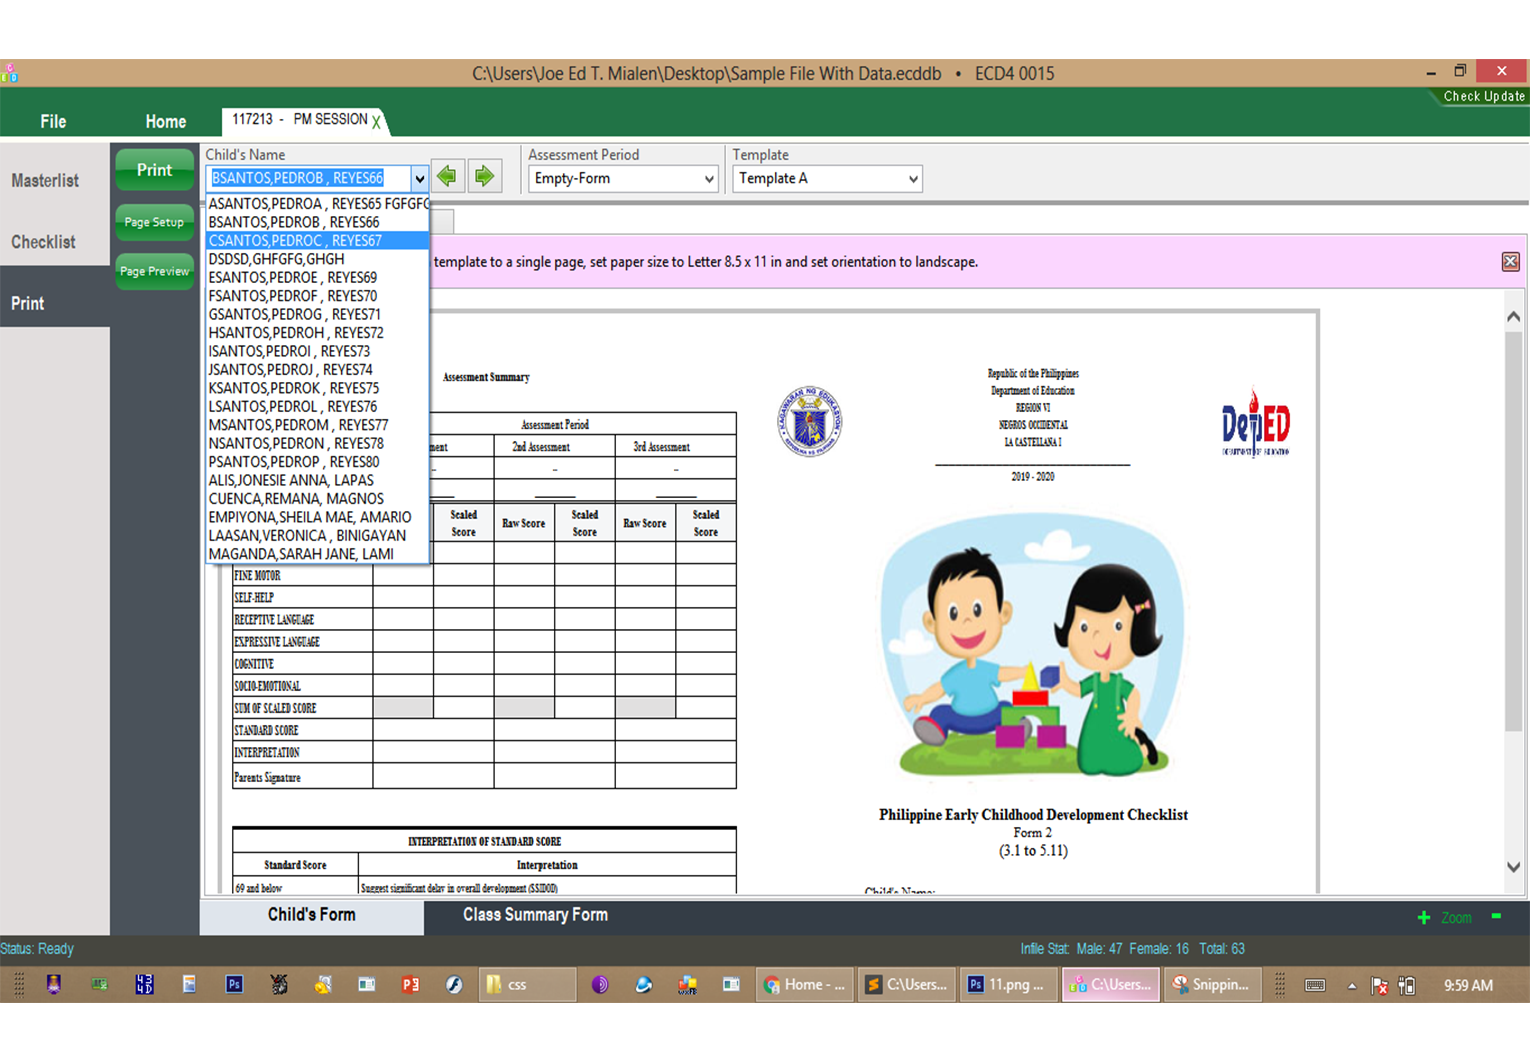 Generating childs report template A front face